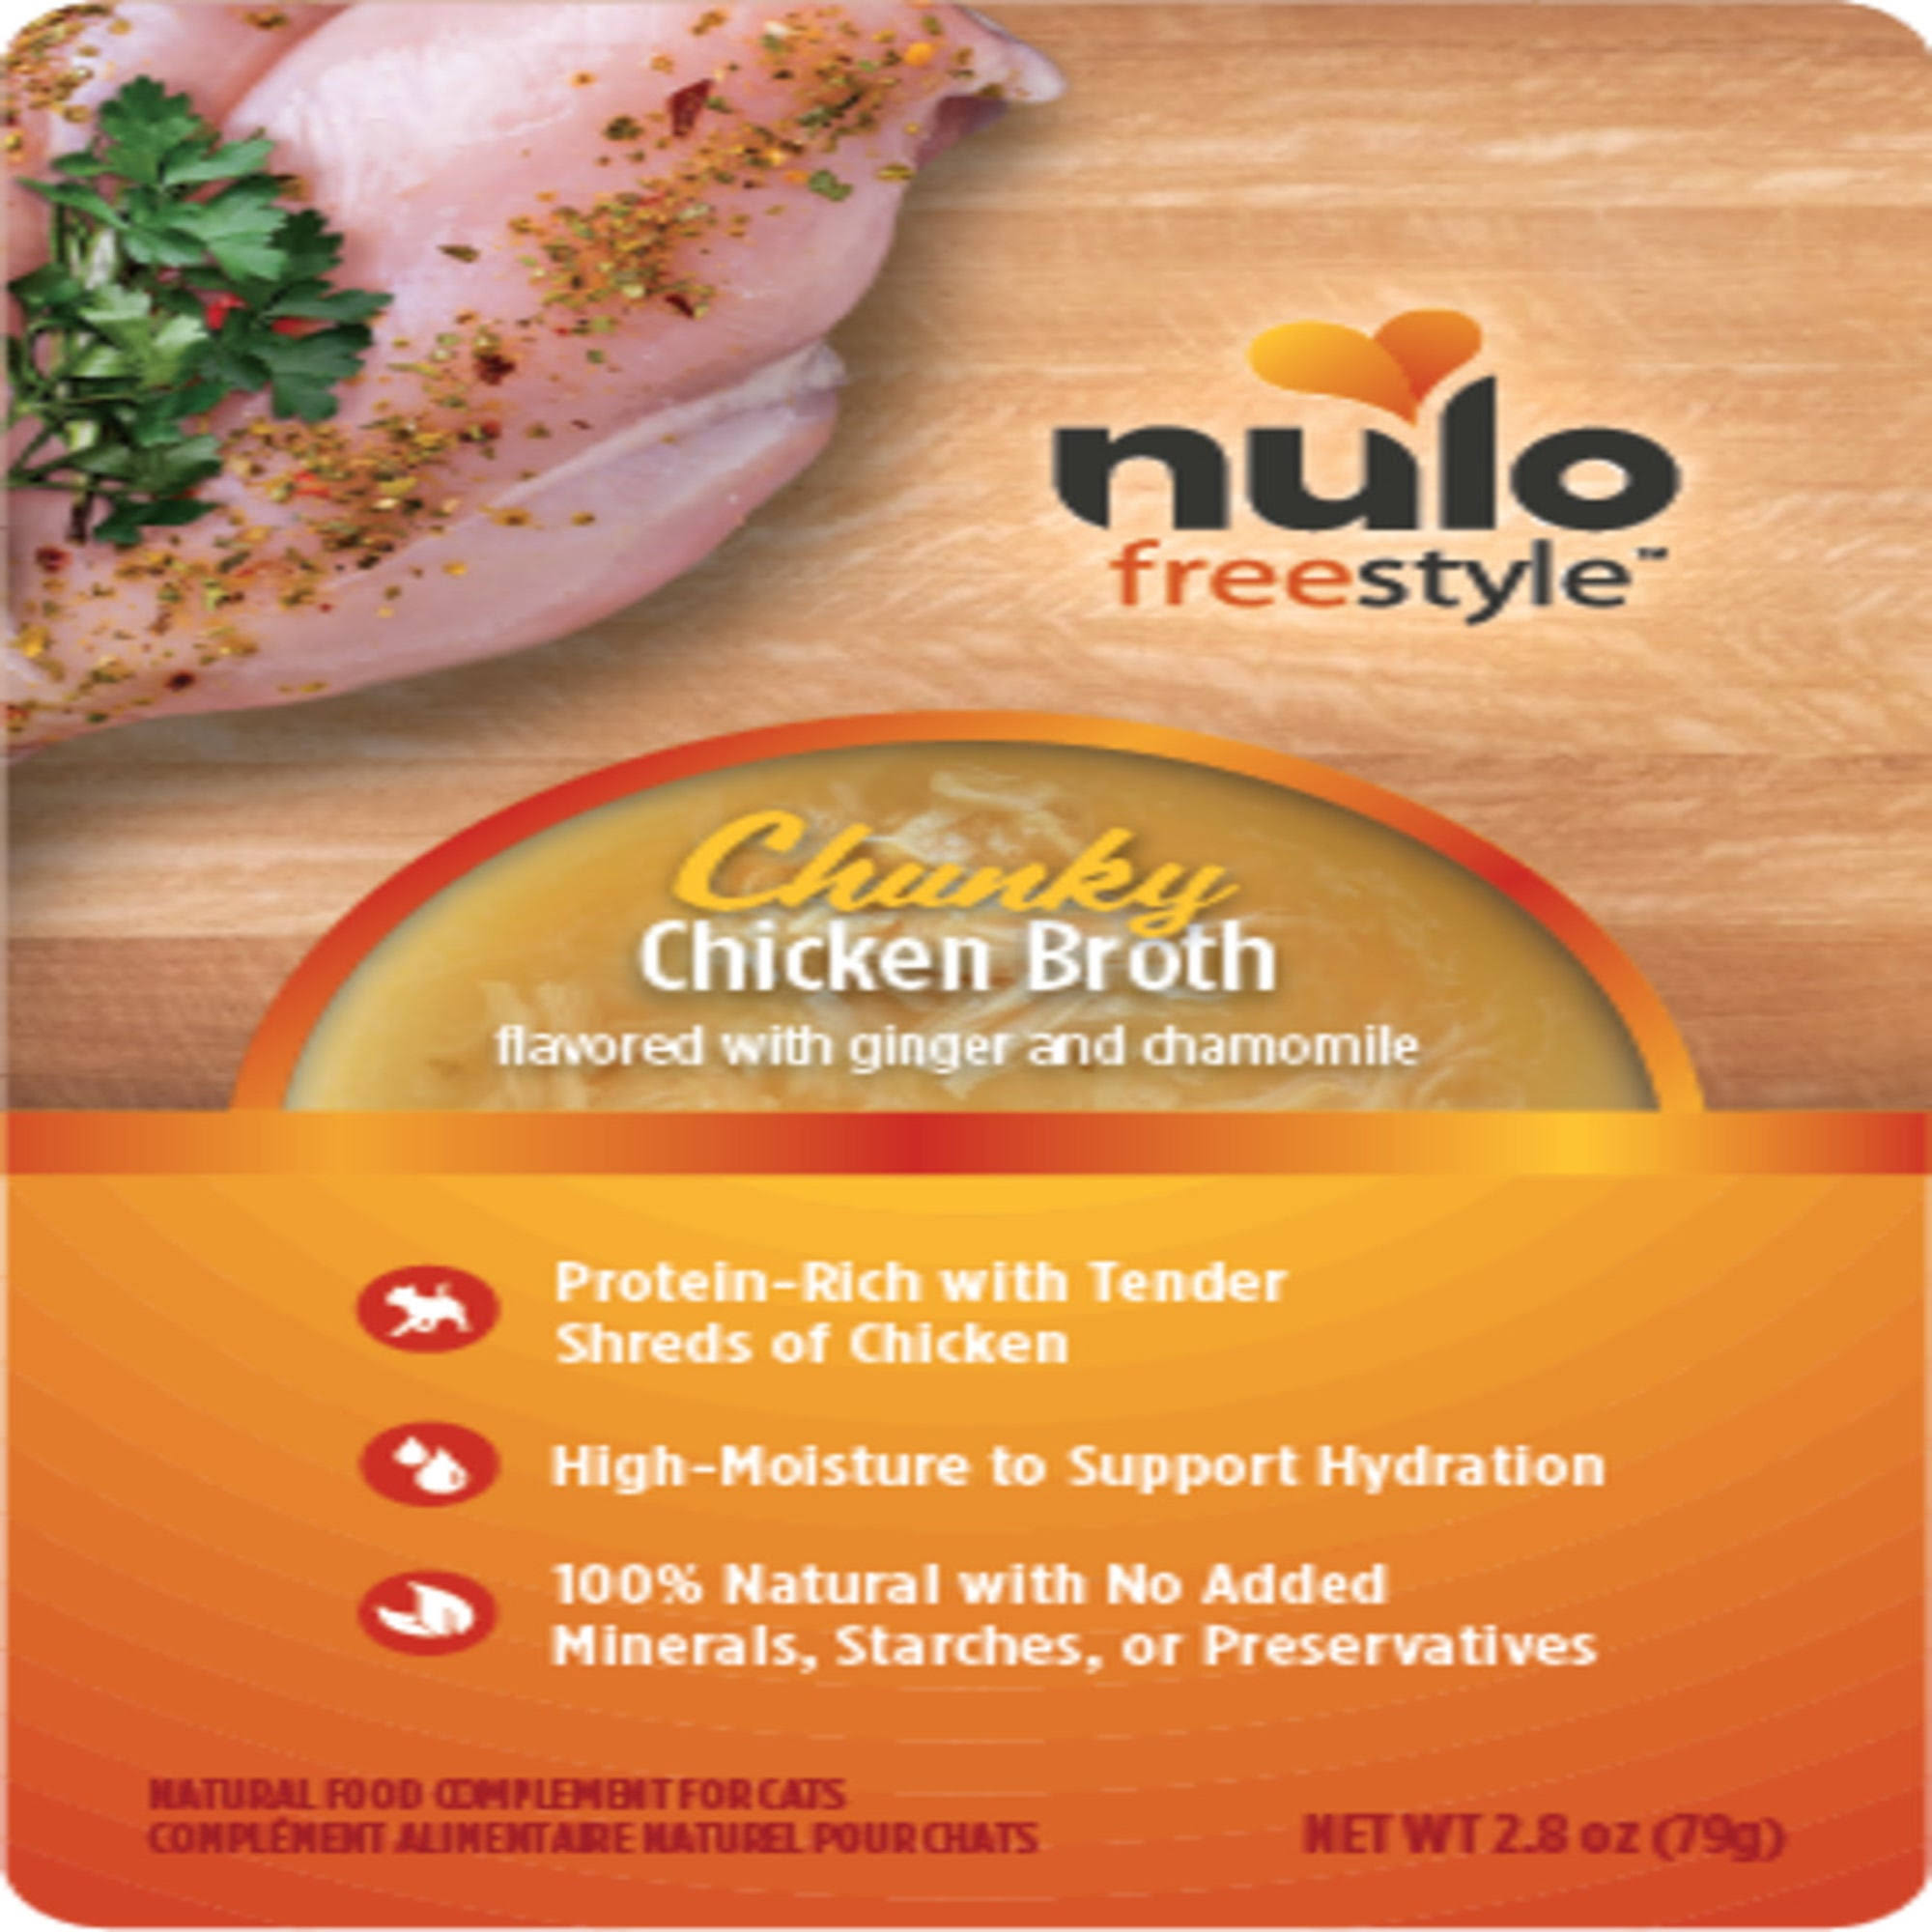 Nulo Freestyle Chunky Broths Wet Cat Food 24ea/2.8 oz - Chicken